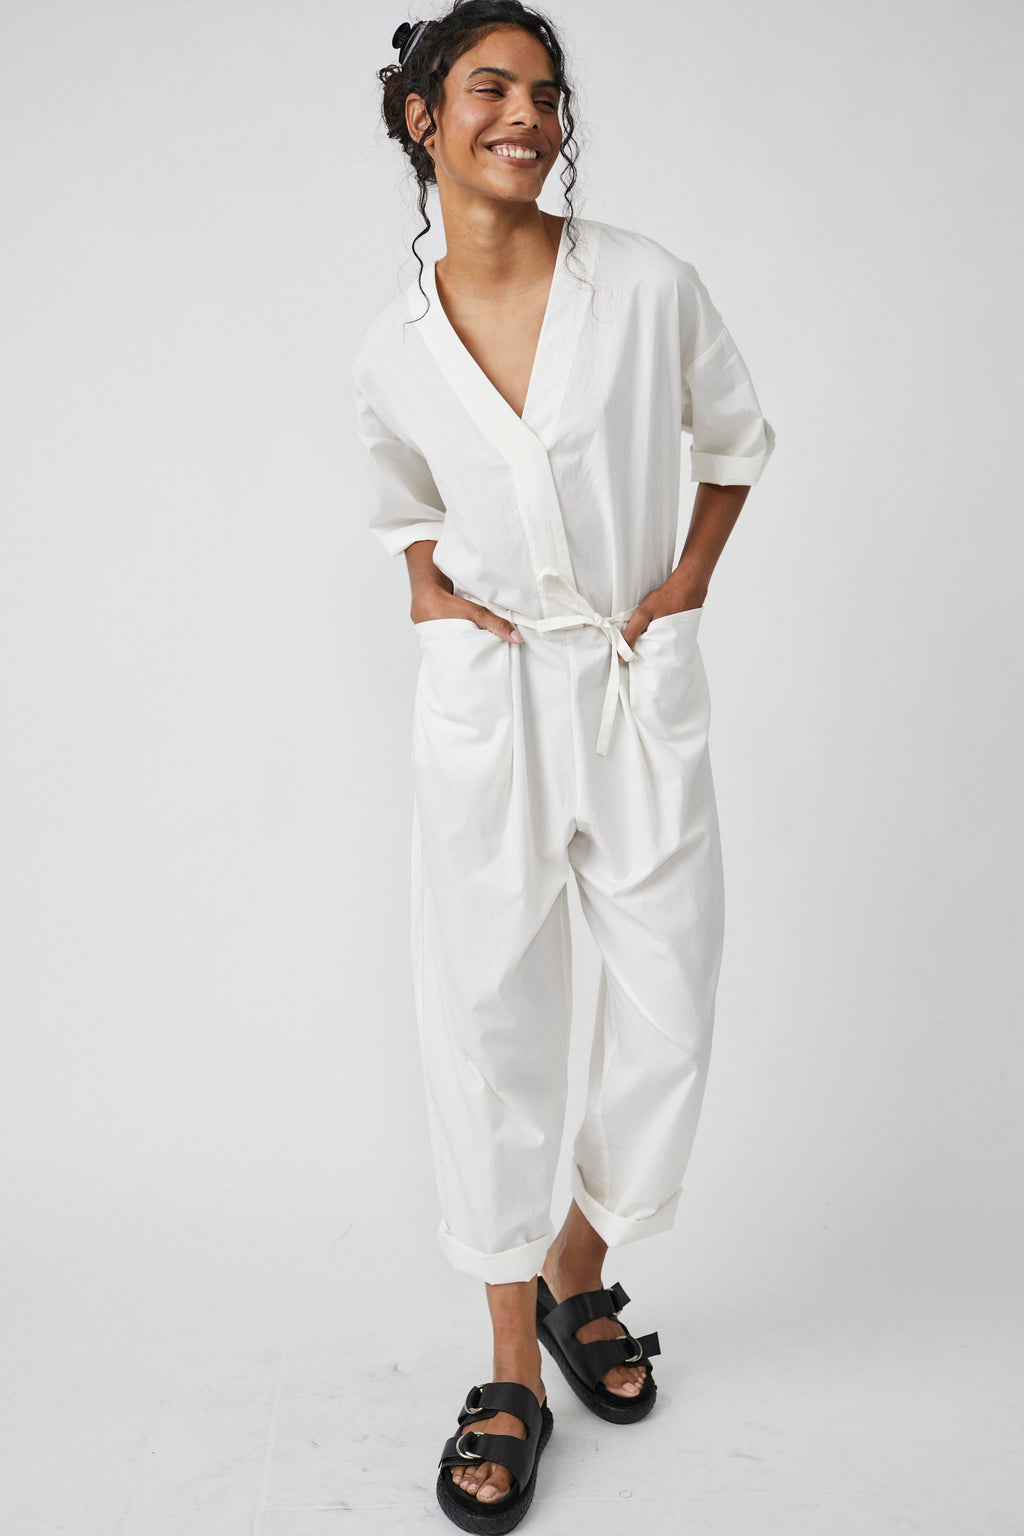 FREE PEOPLE FEELS SO RIGHT ONE PIECE - IVORY